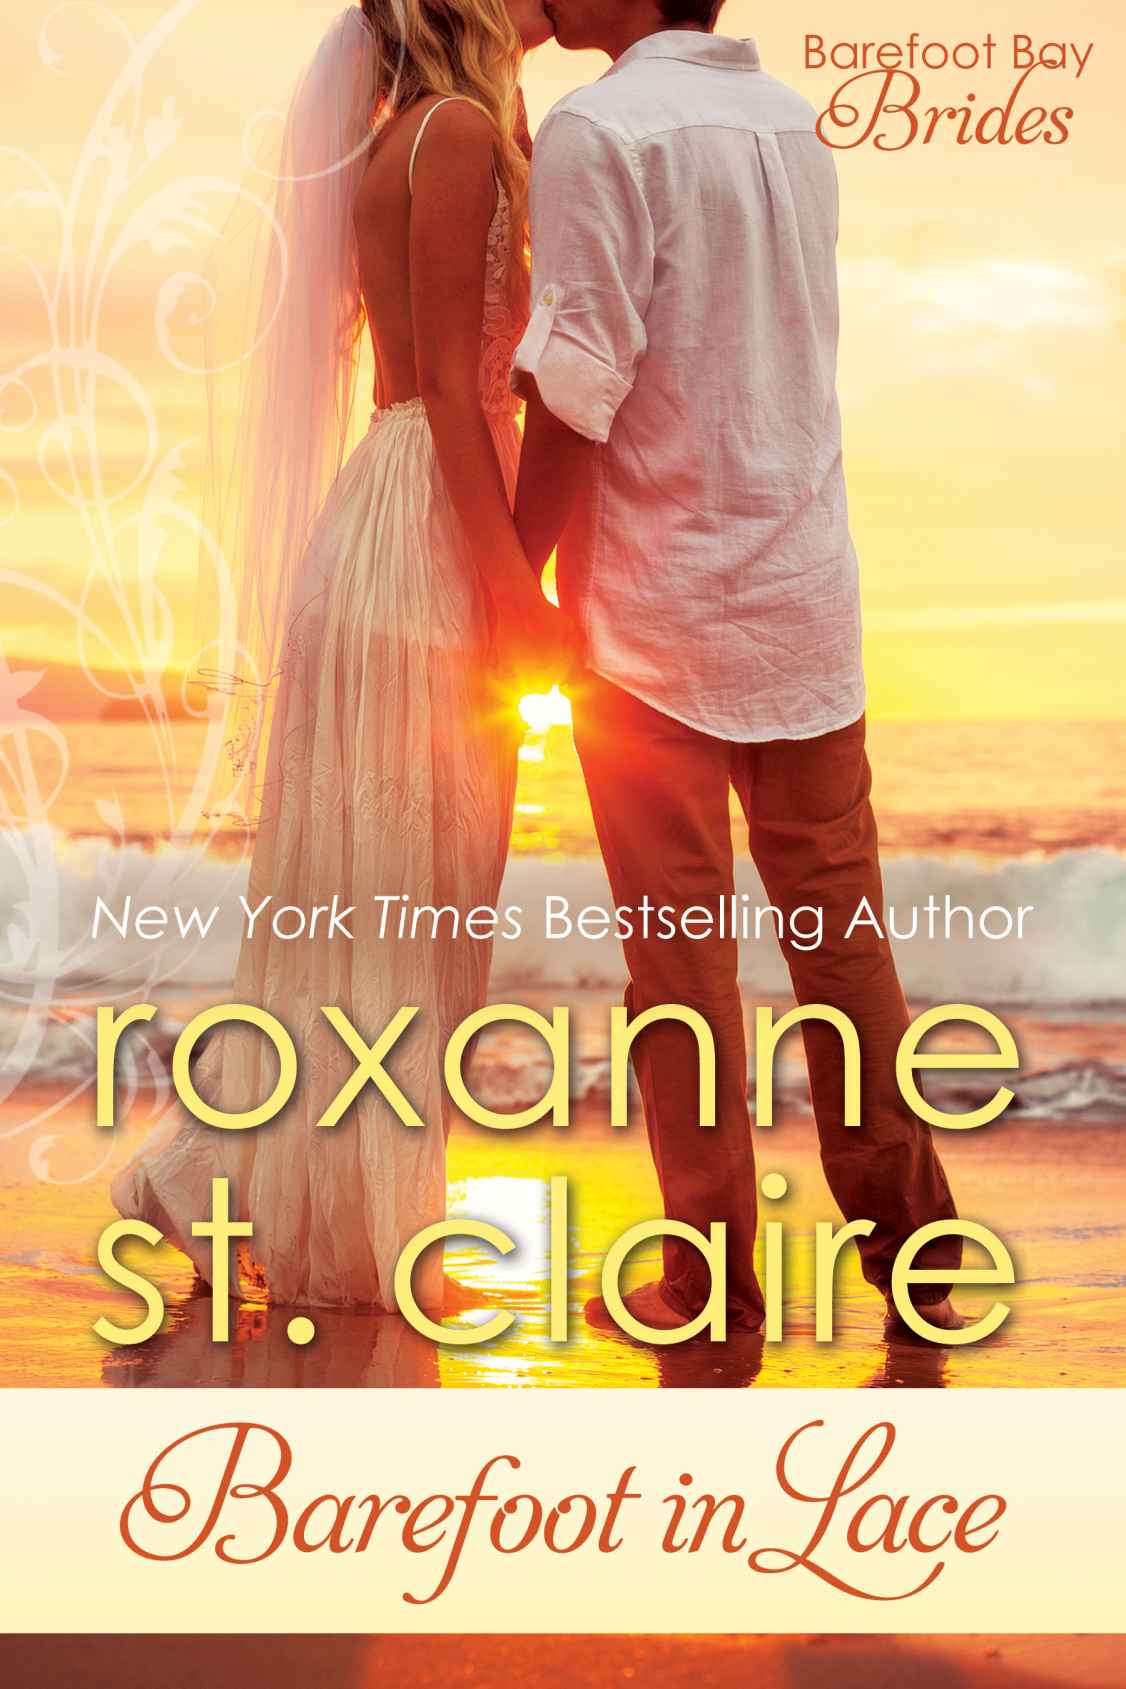 Barefoot in Lace (Barefoot Bay Brides Book 2) by Roxanne St. Claire